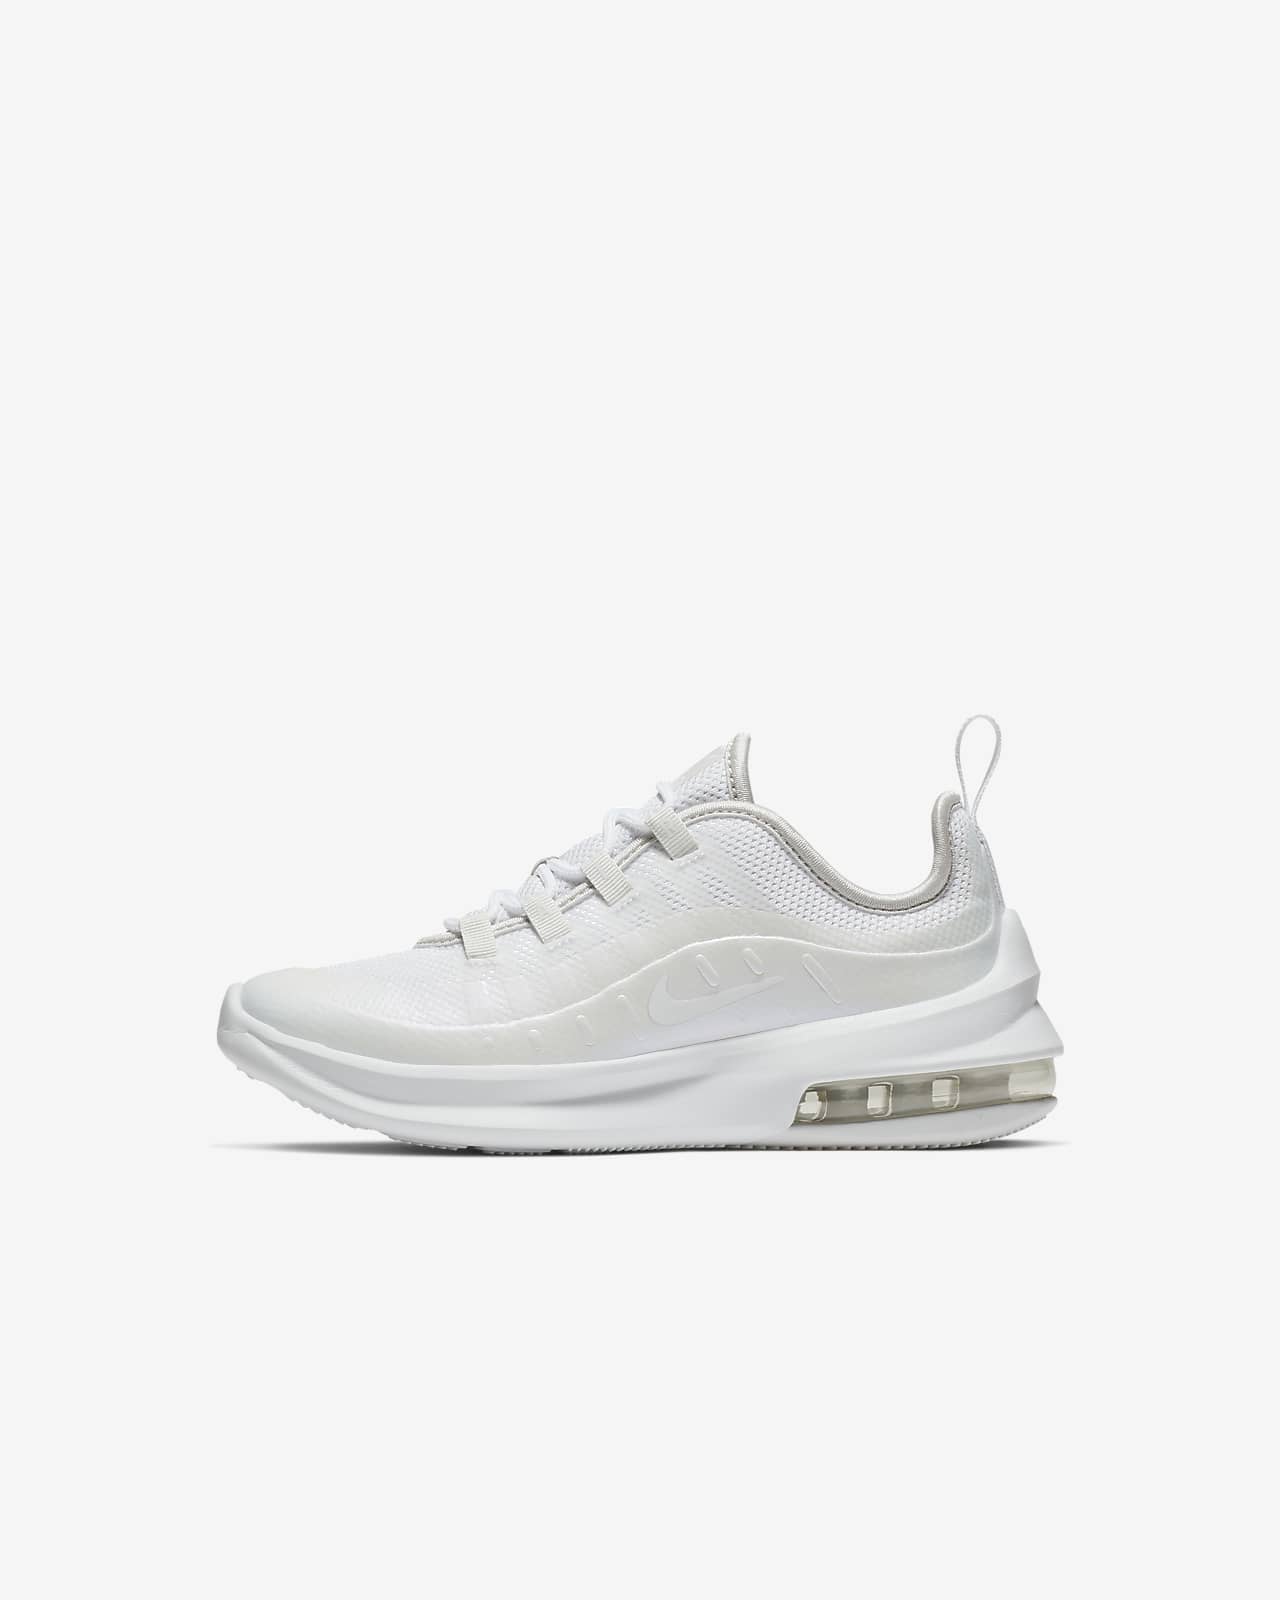 Special faint Answer the phone Nike Air Max Axis Younger Kids' Shoe. Nike SA